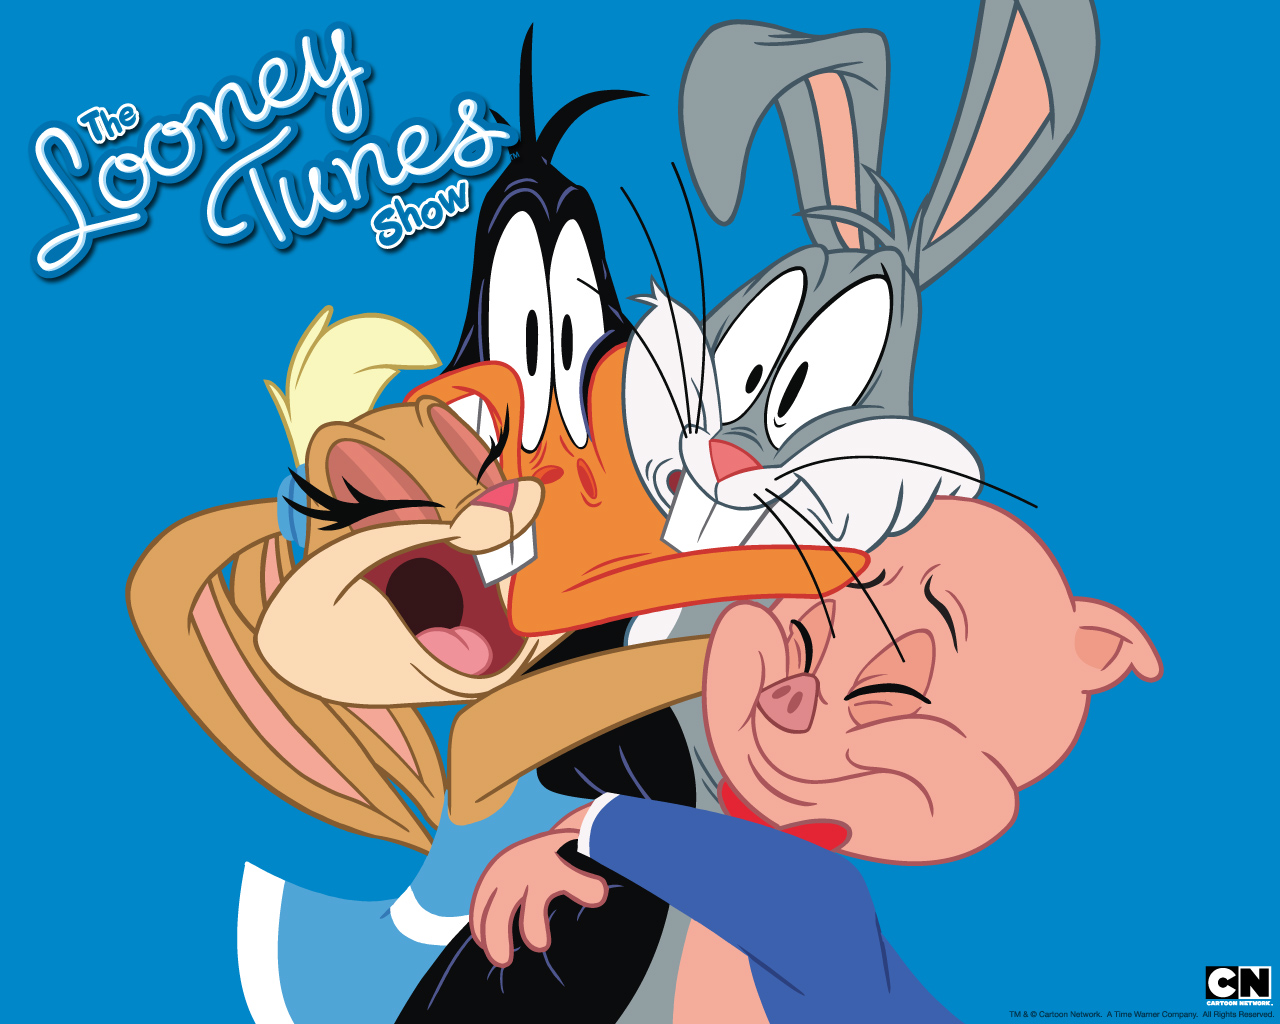 Similar Wallpaper Images - Looney Tunes Show Posters , HD Wallpaper & Backgrounds